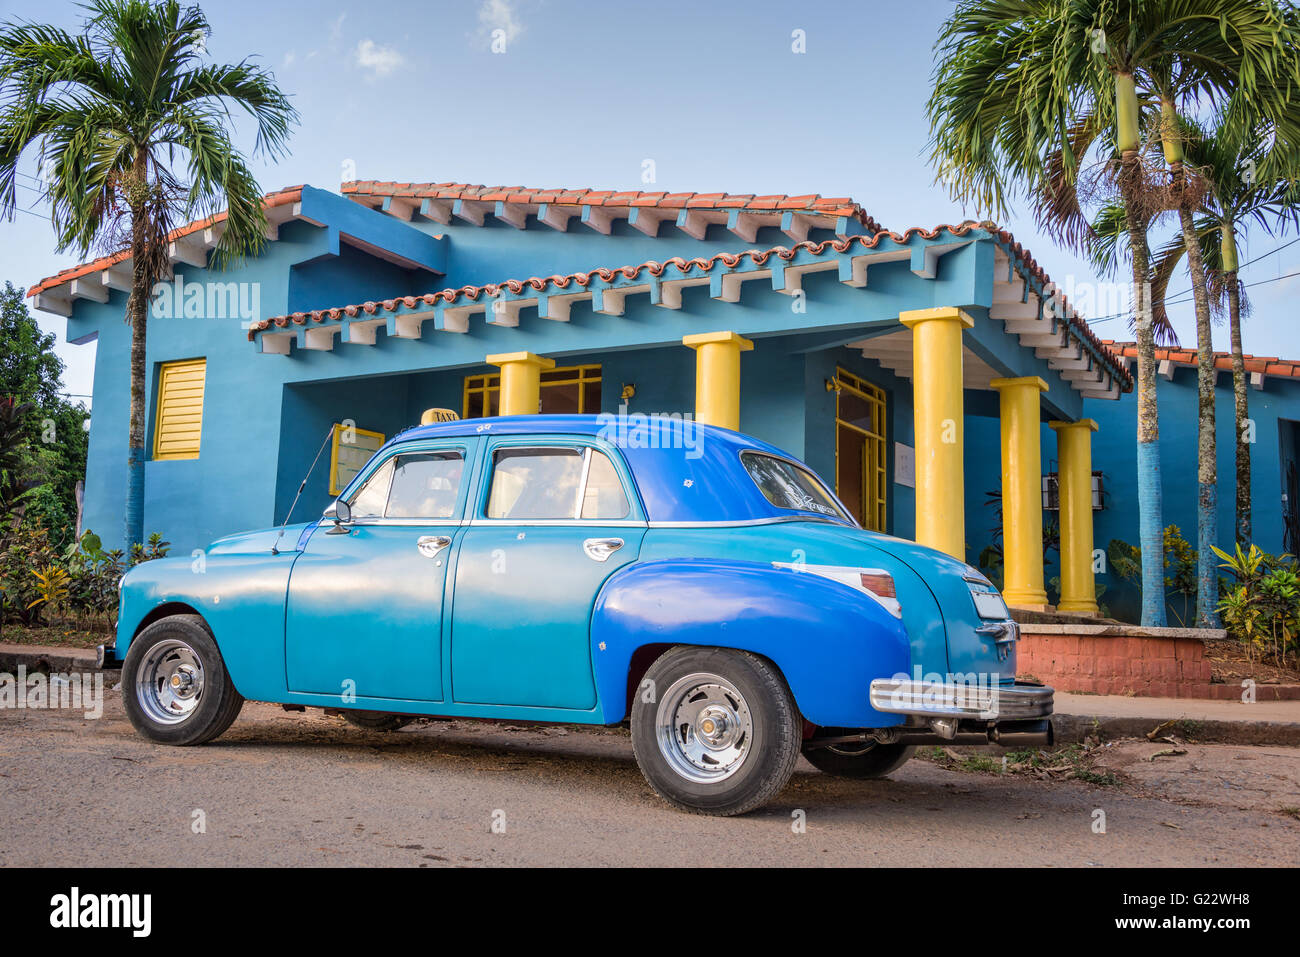 Blue old classic american car in Vinales, Cuba Stock Photo